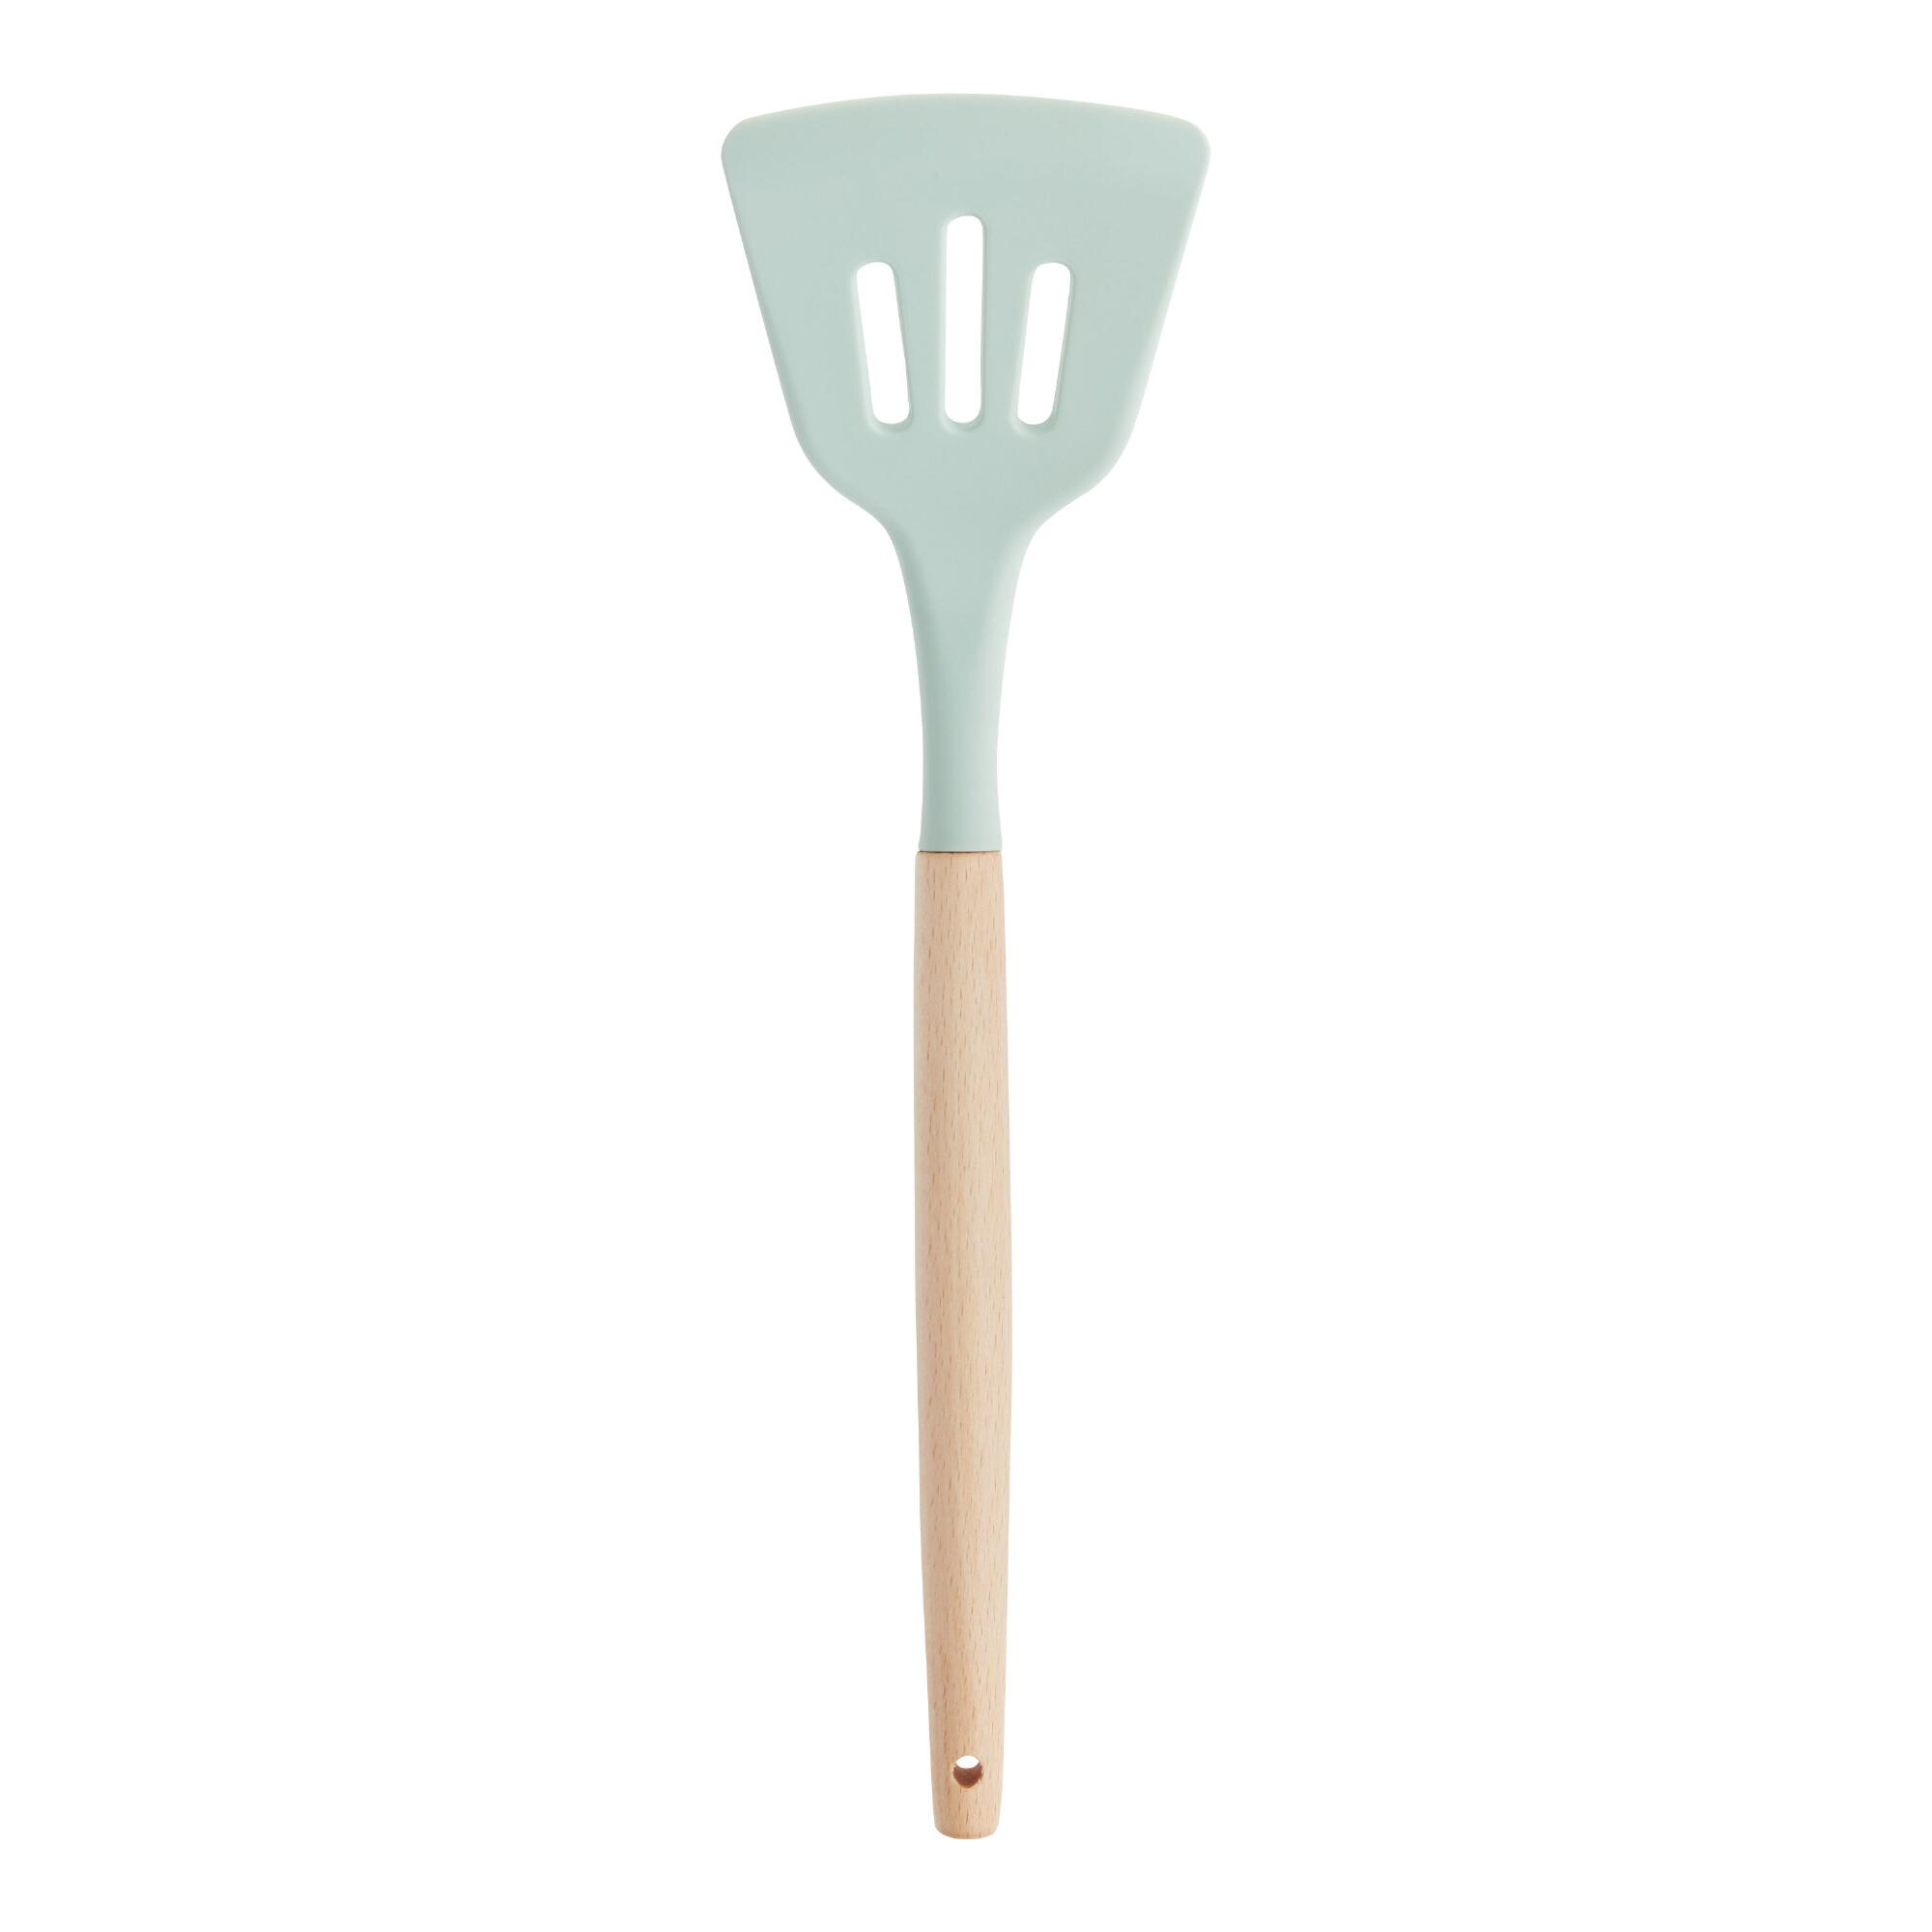 Sage Green Silicone Slotted Turner with Wood Handle Set of 2 by World Market